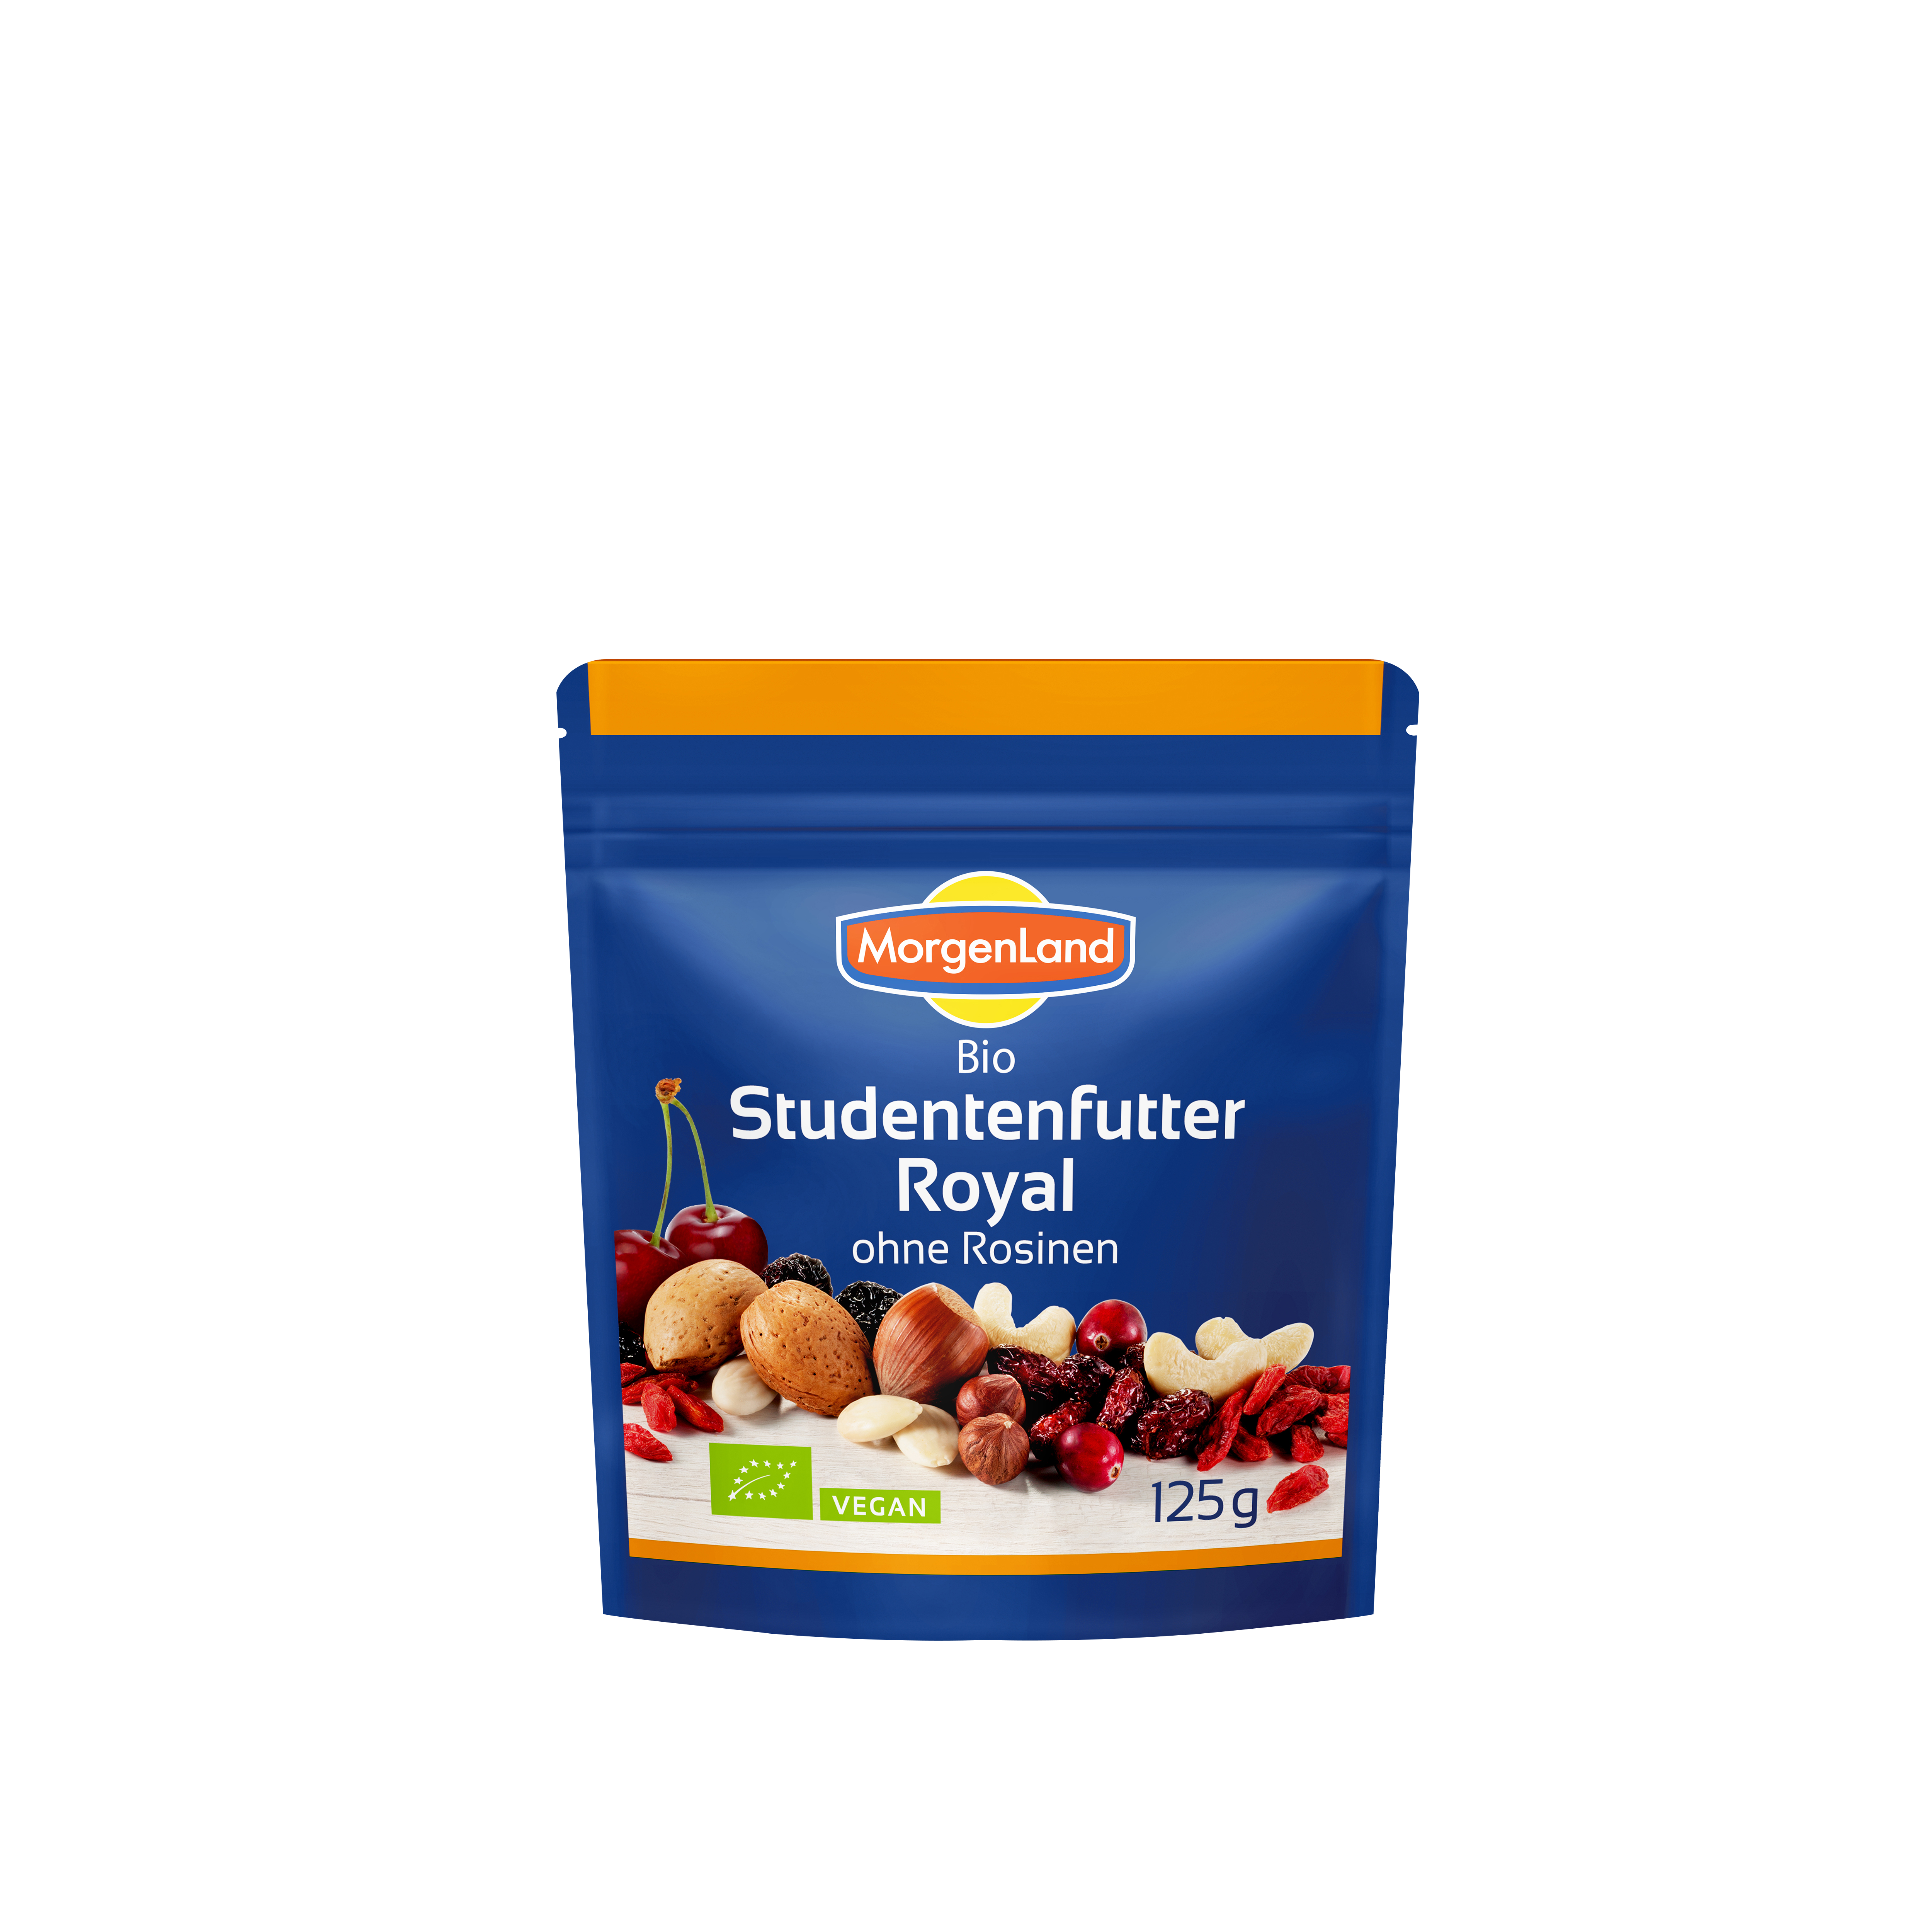 MorgenLand Studentenfutter Royal 125g